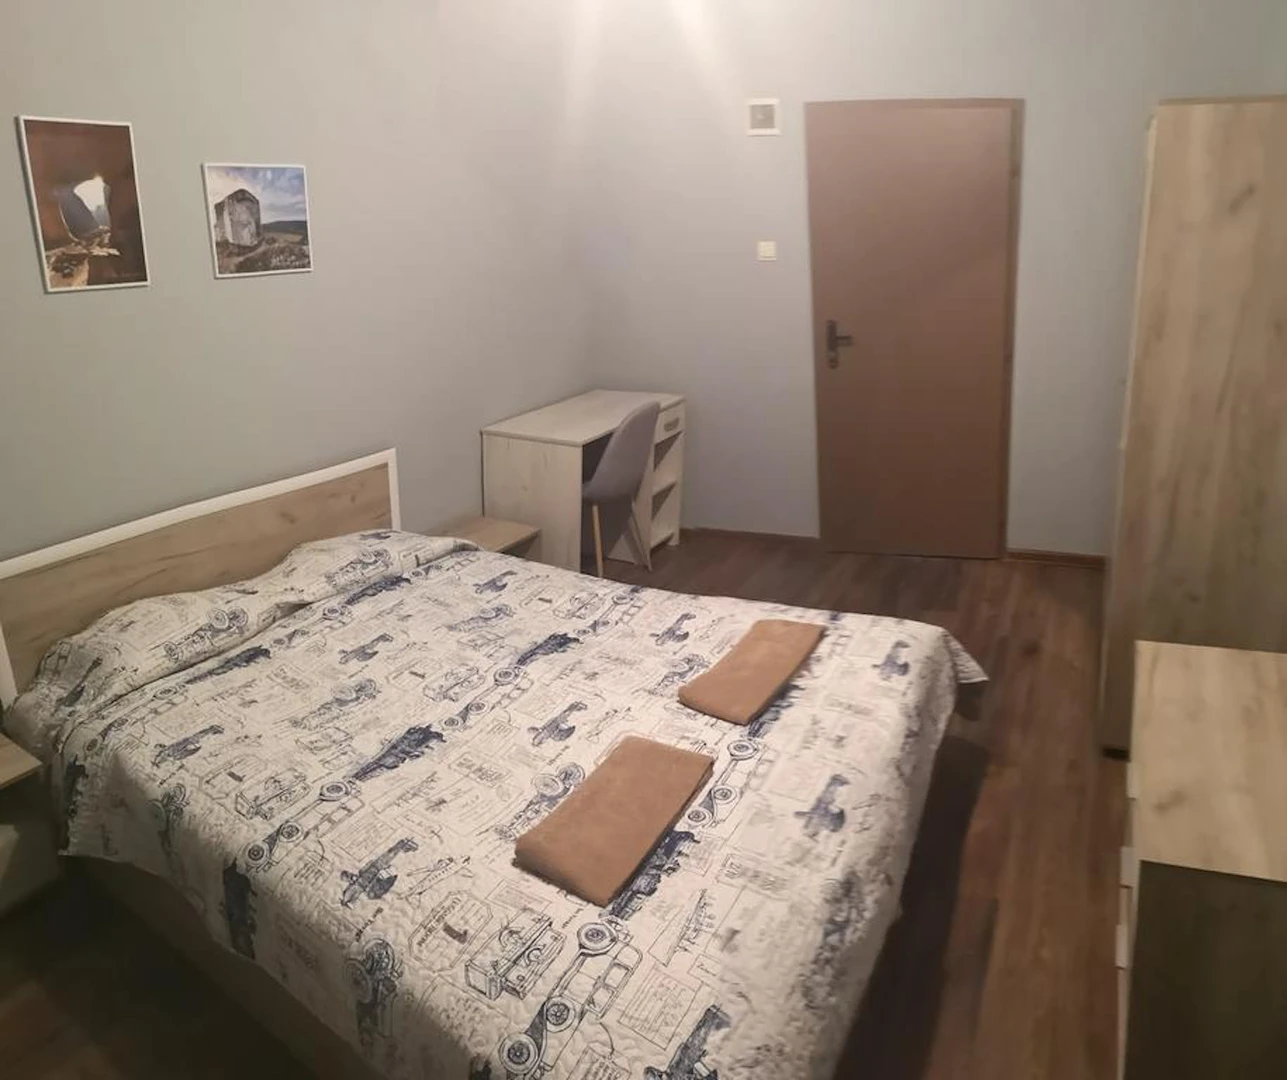 Renting rooms by the month in Sofia